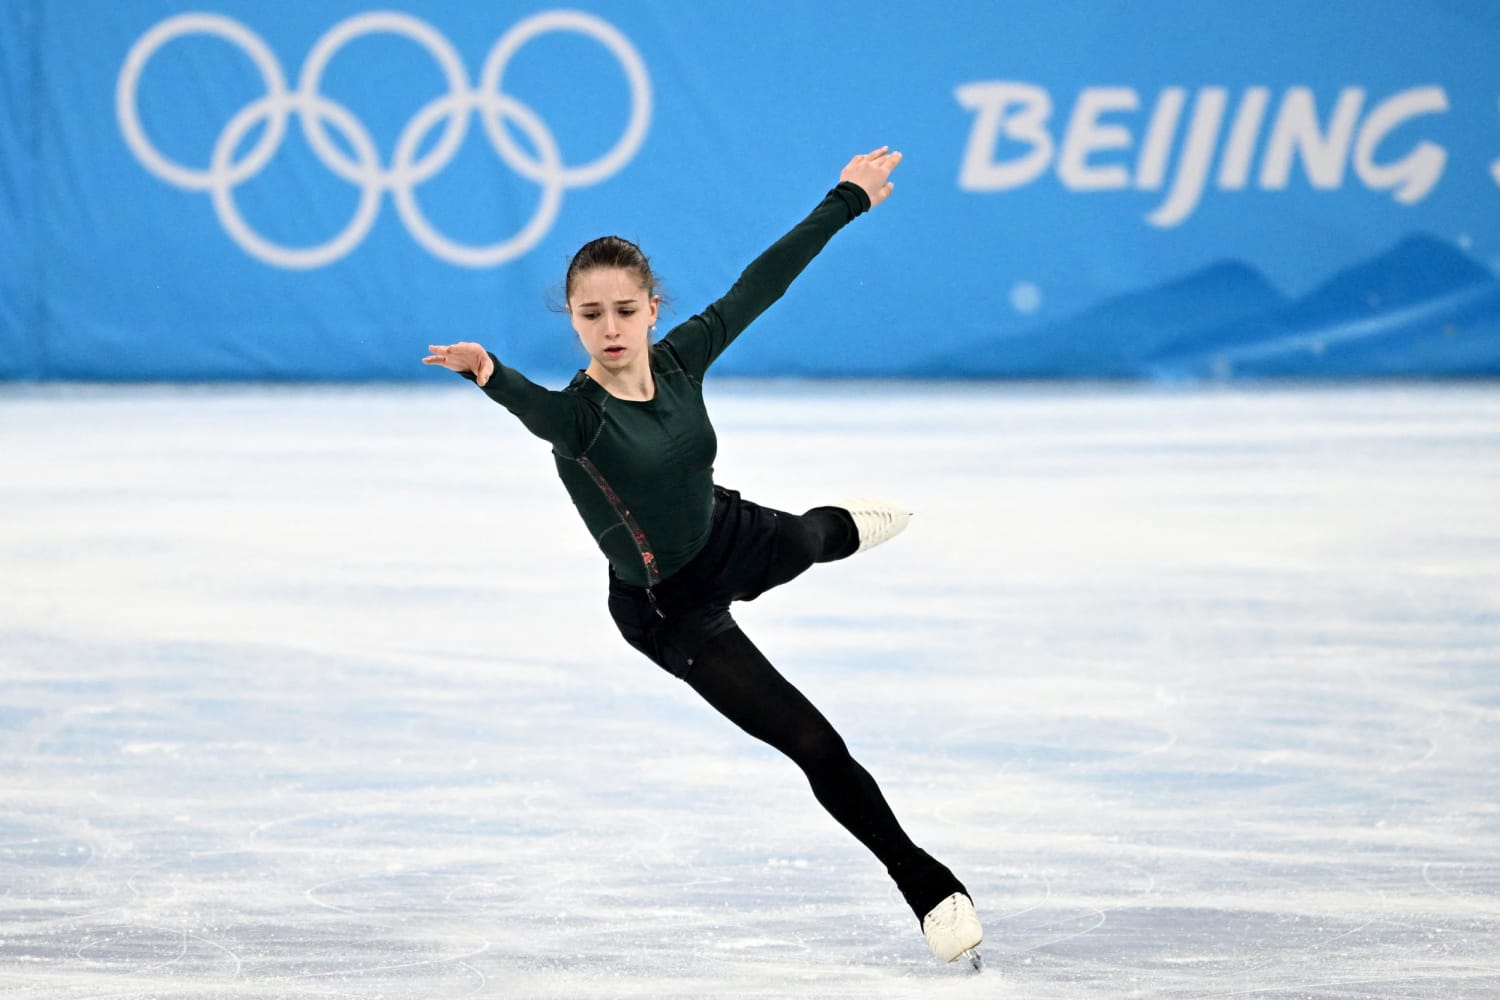 Raising Age Limit for Figure Skating Could End Era of Quad Jumps